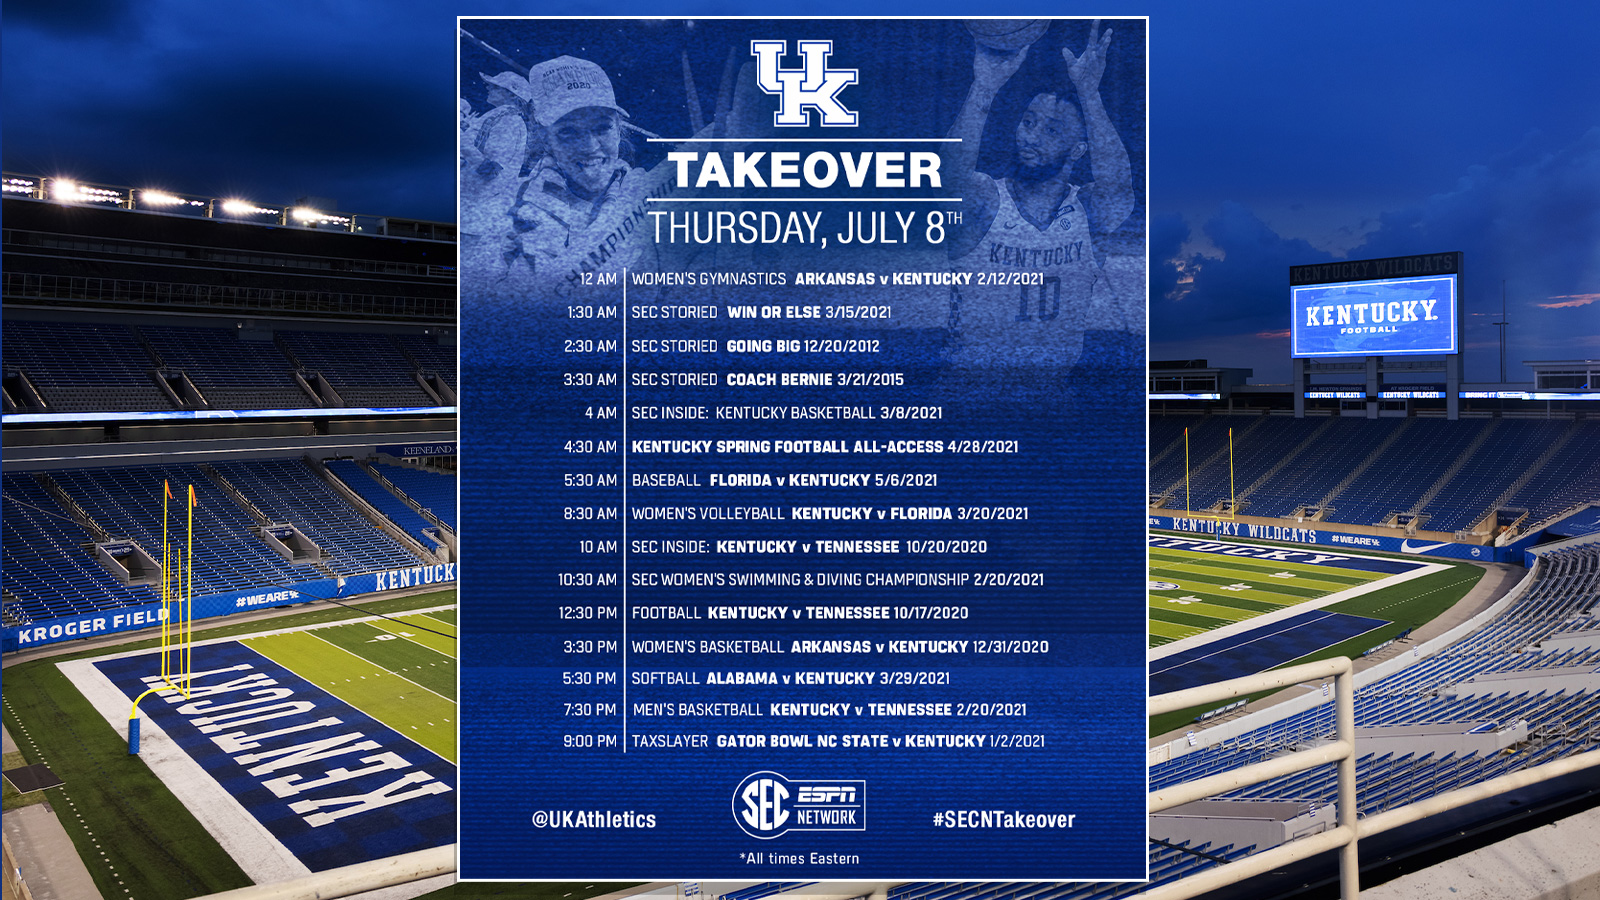 Kentucky Featured on SEC Network “Takeover Day” Thursday